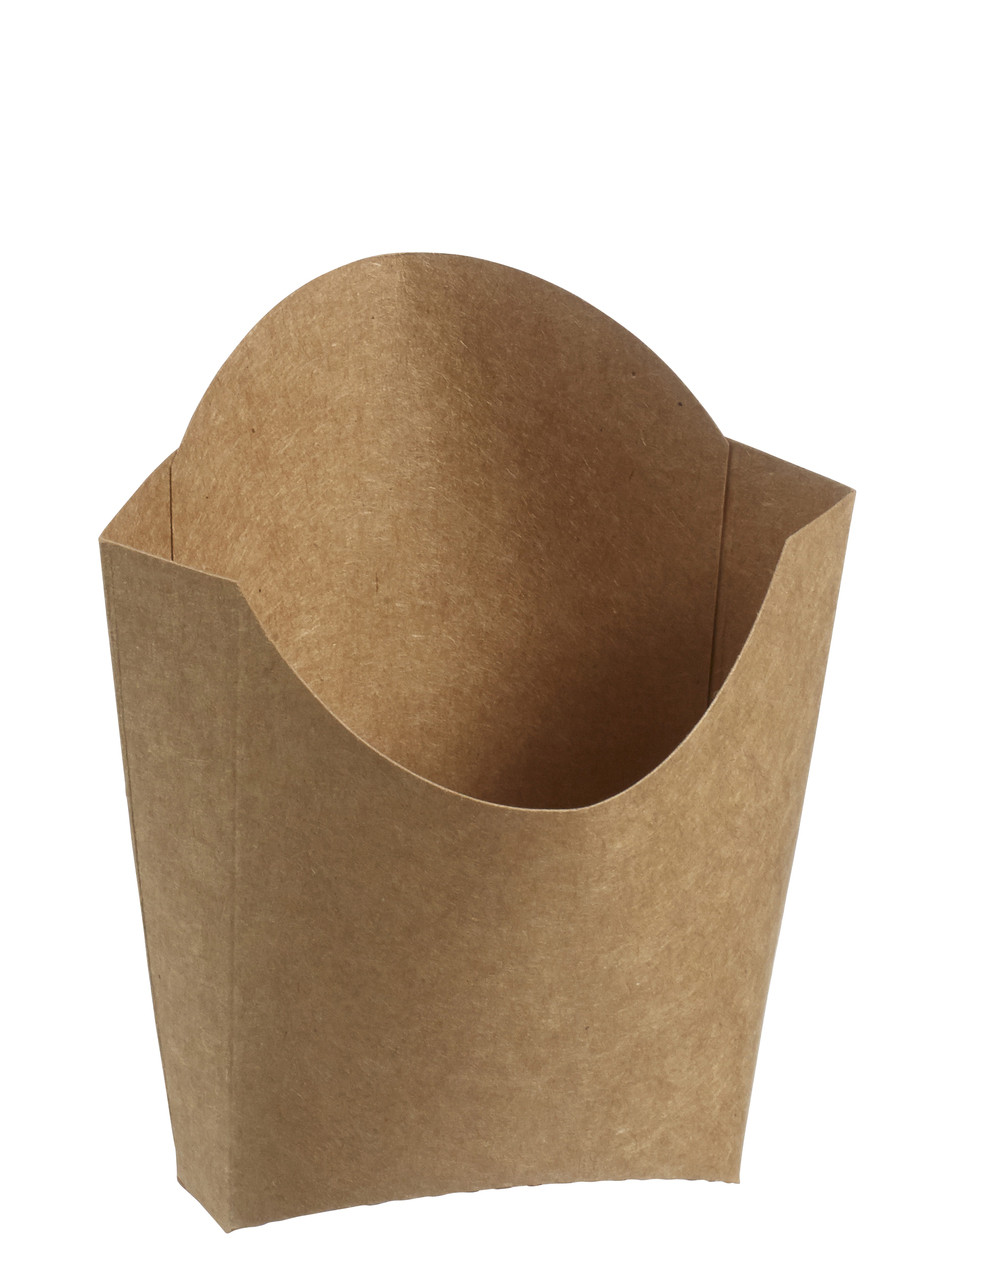 BROWN PAPER BAG FOR FRENCH FRIES 3/4LB DOUBLE WHITE INTERIOR  3,5x2,25X5,75 - Paper bags